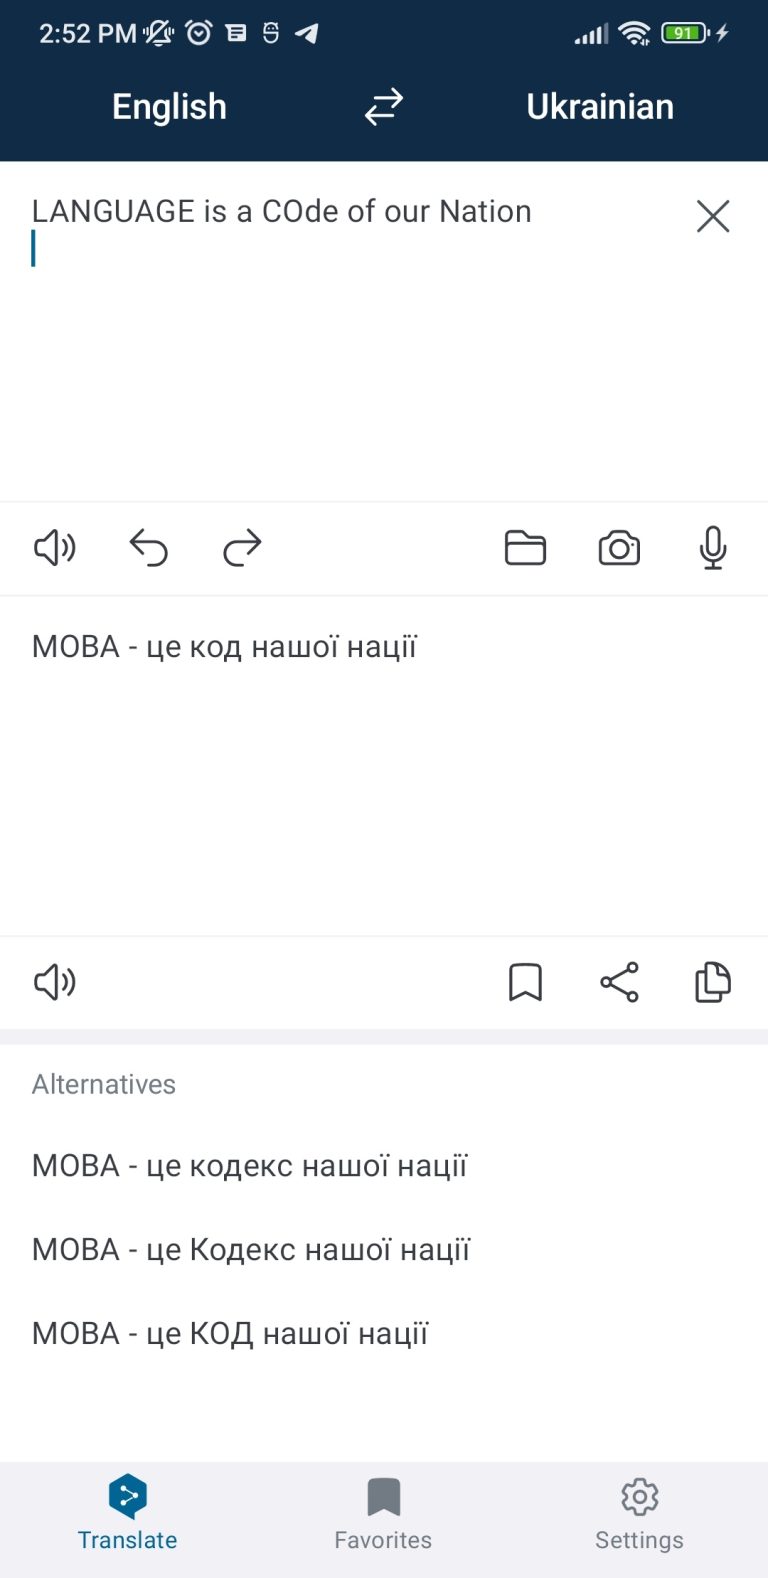 No bugs found when the translation of text with words in upper & lower cases